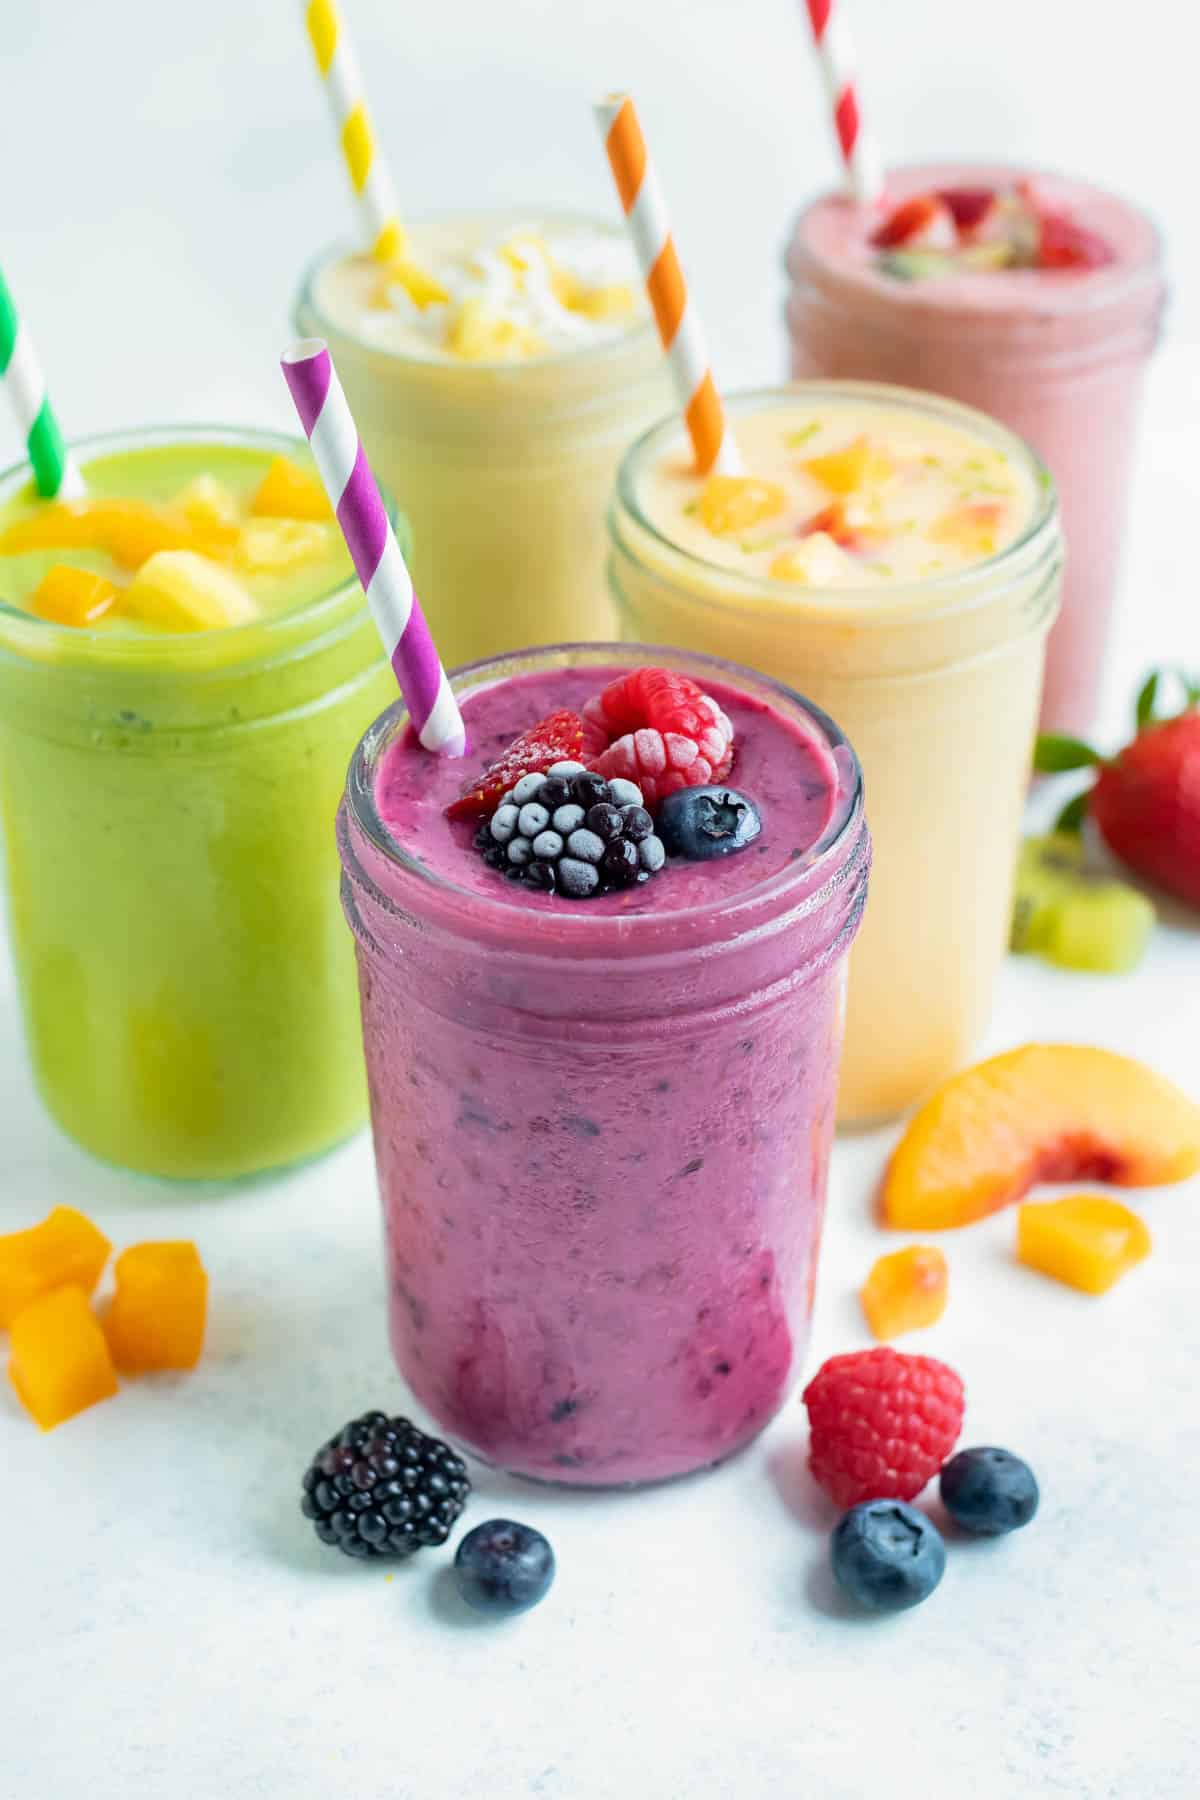 Fruit smoothies are set on the counter and enjoyed for a delicious breakfast drink.